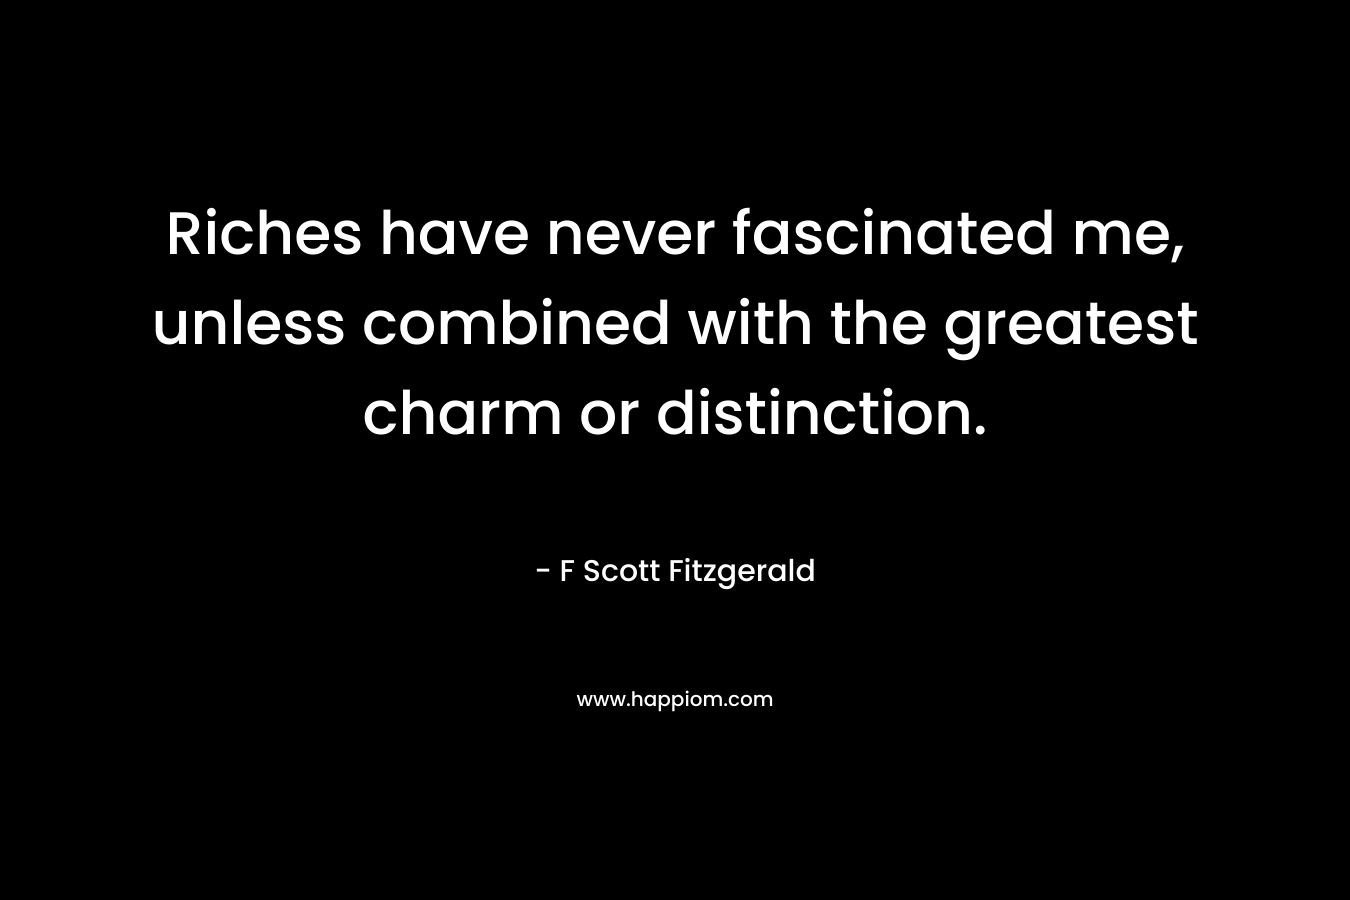 Riches have never fascinated me, unless combined with the greatest charm or distinction.